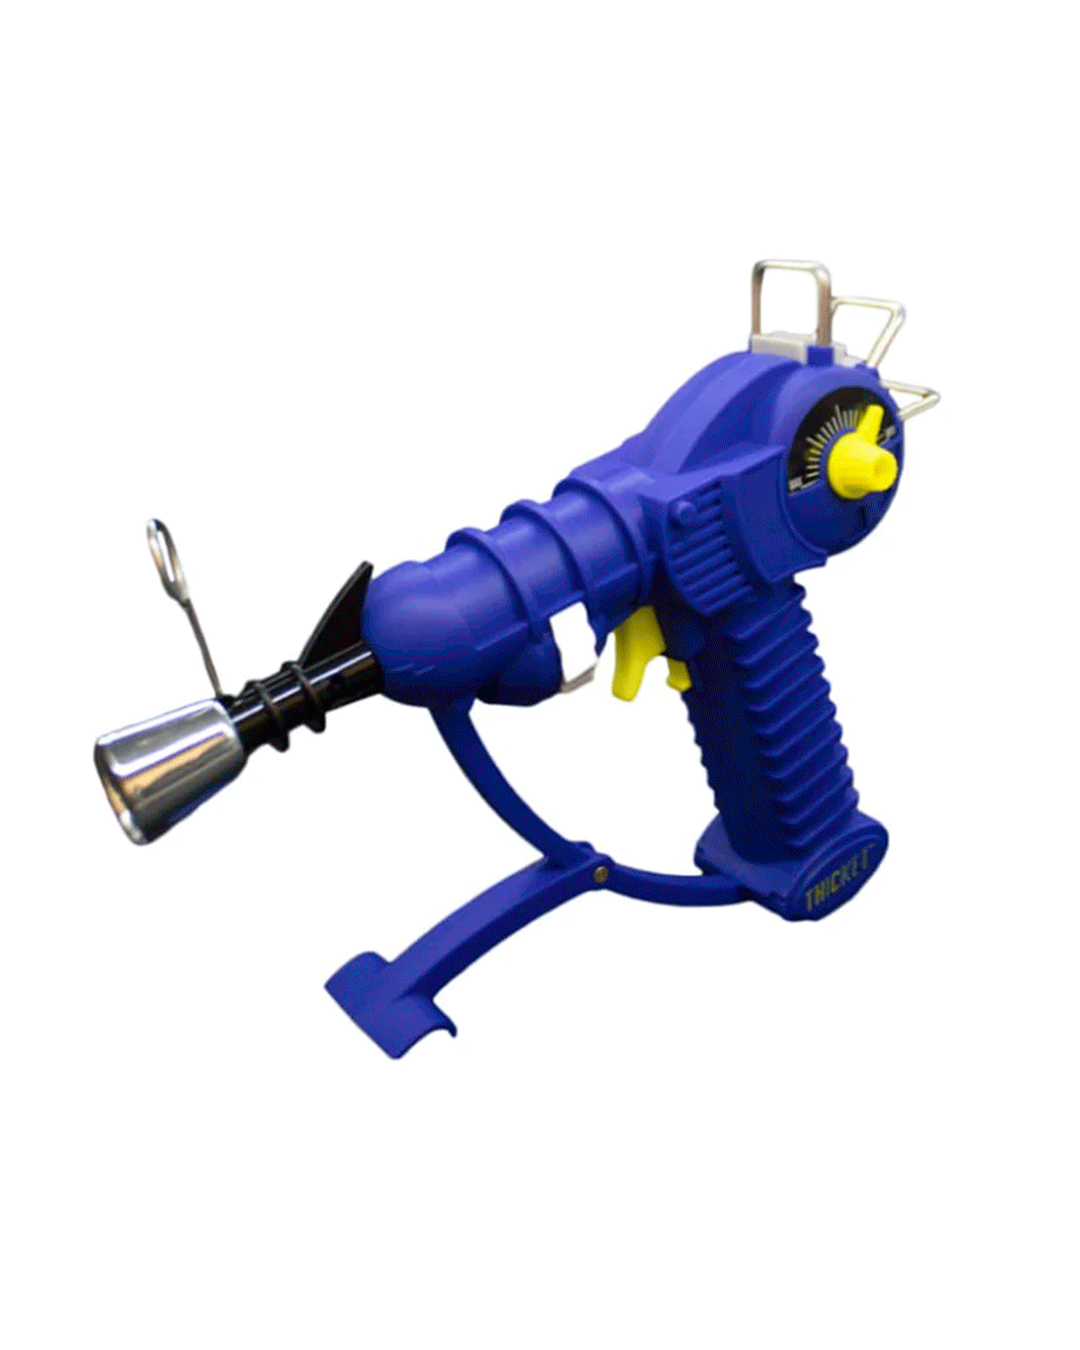 Space Out - Ray Gun Torch